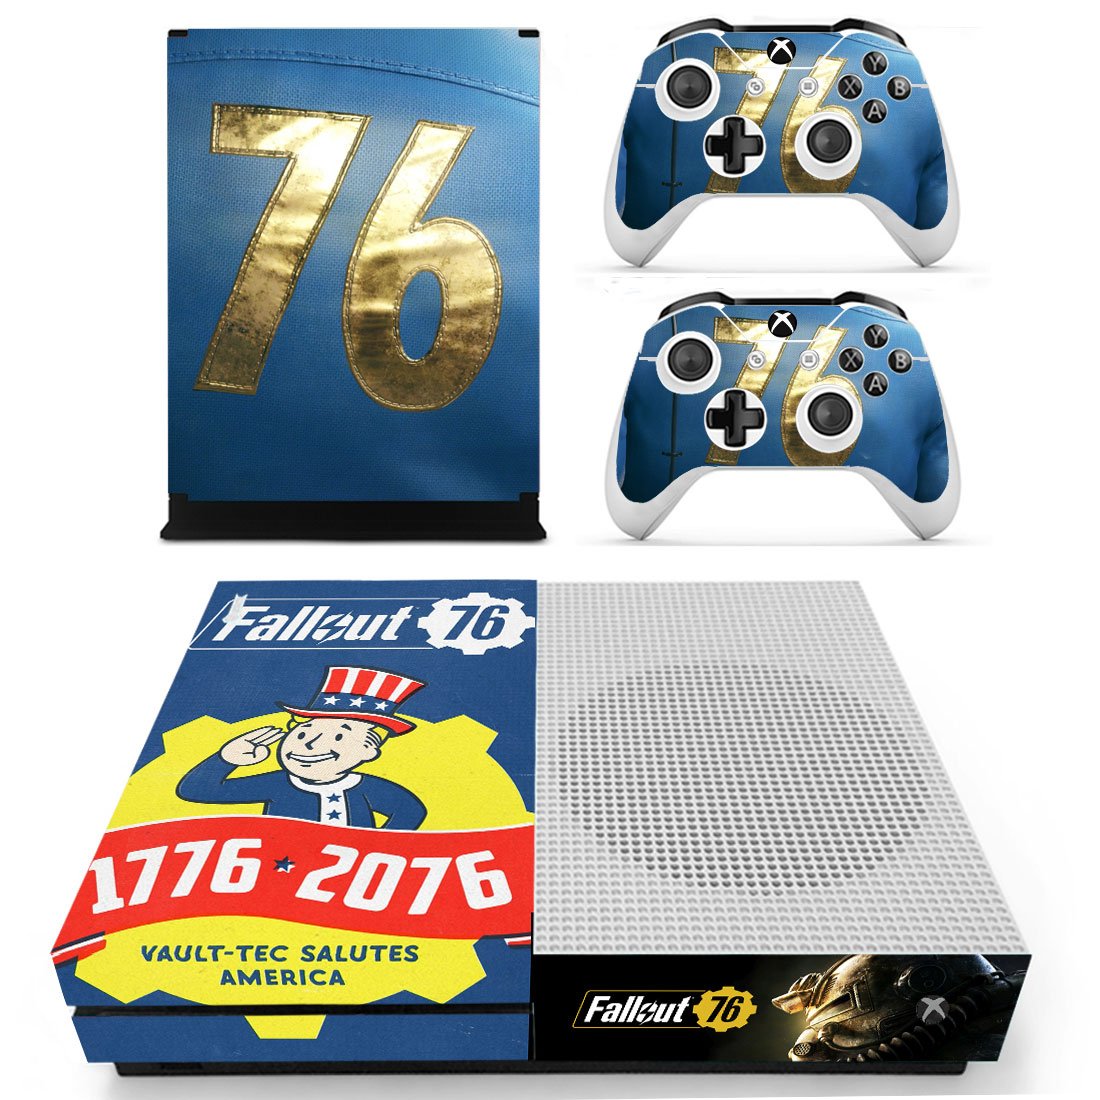 xbox one s fallout 76